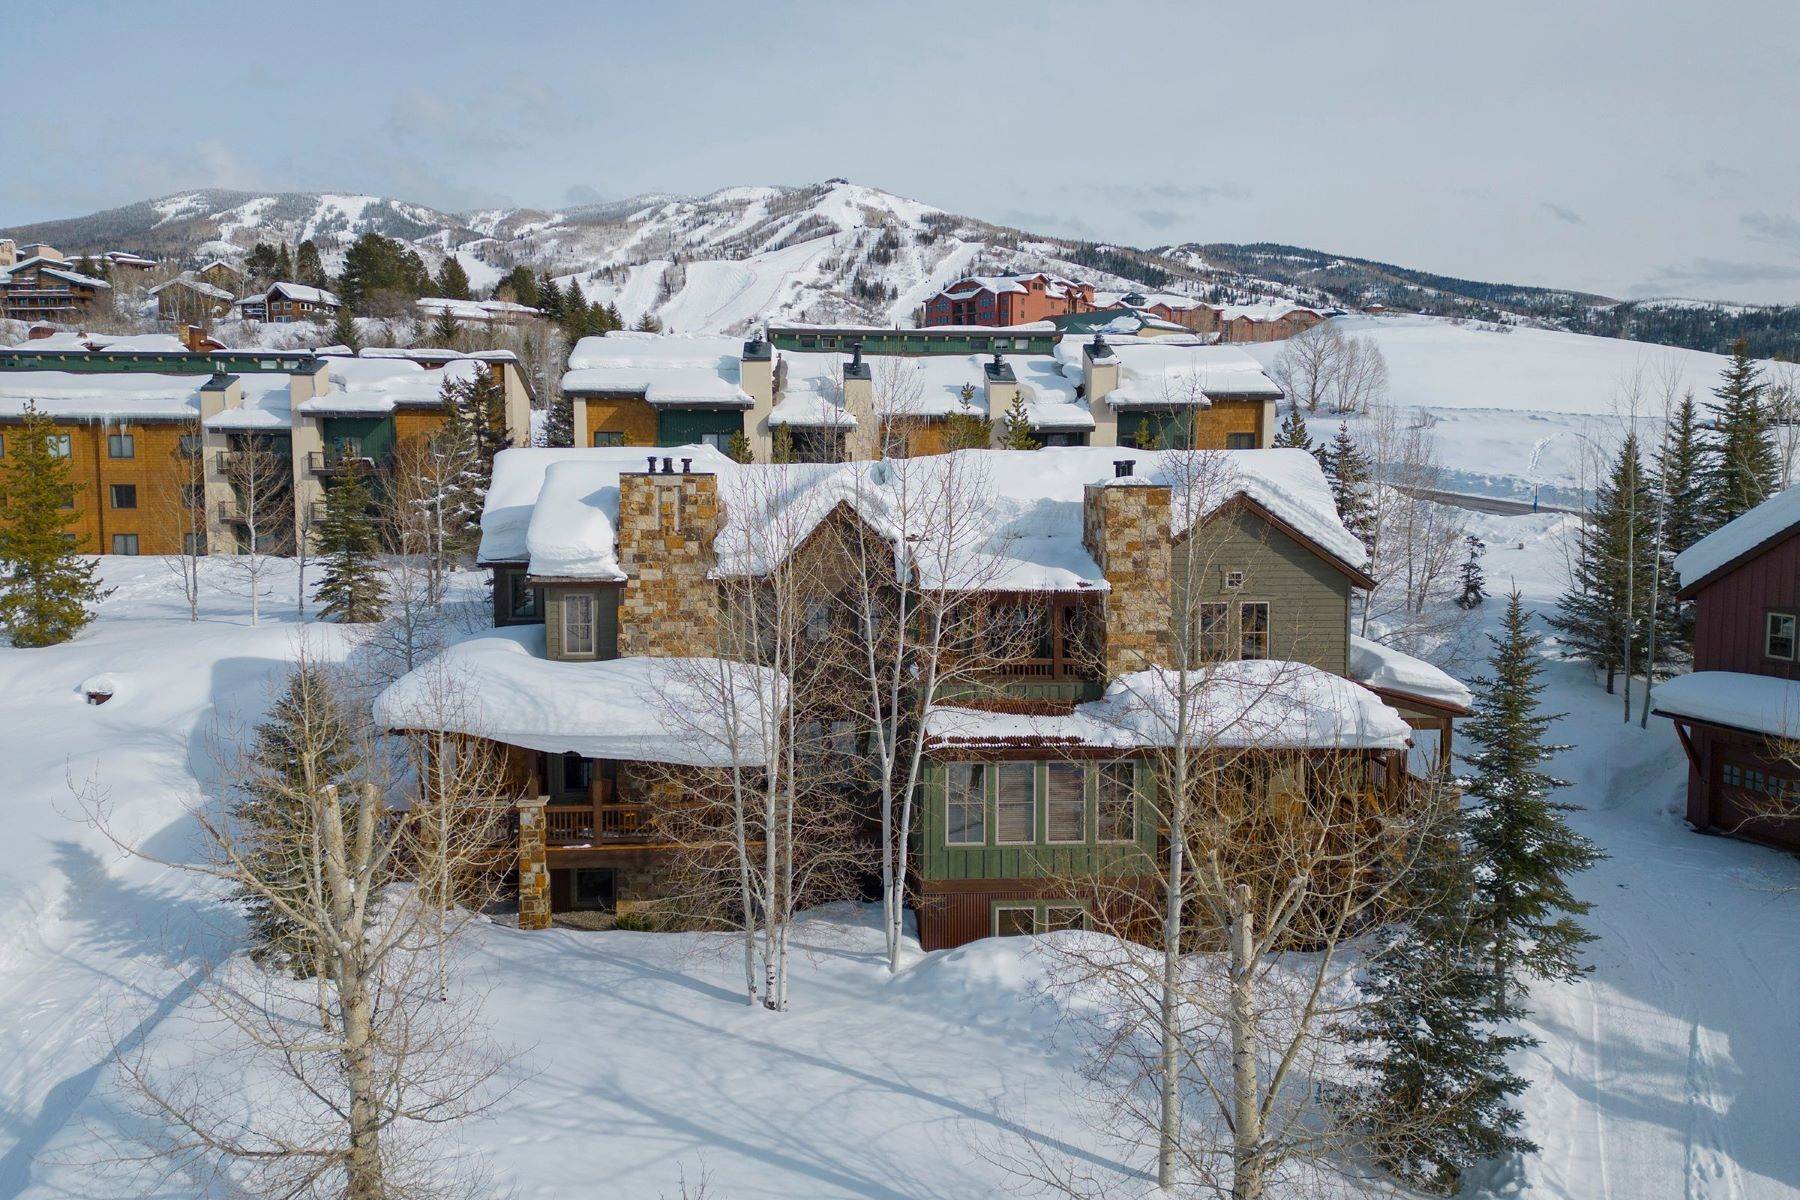 Fractional Ownership Property for Sale at 1331 Turning Leaf Court, Steamboat Springs, CO, 80487 1331 Turning Leaf Court Steamboat Springs, Colorado 80487 United States